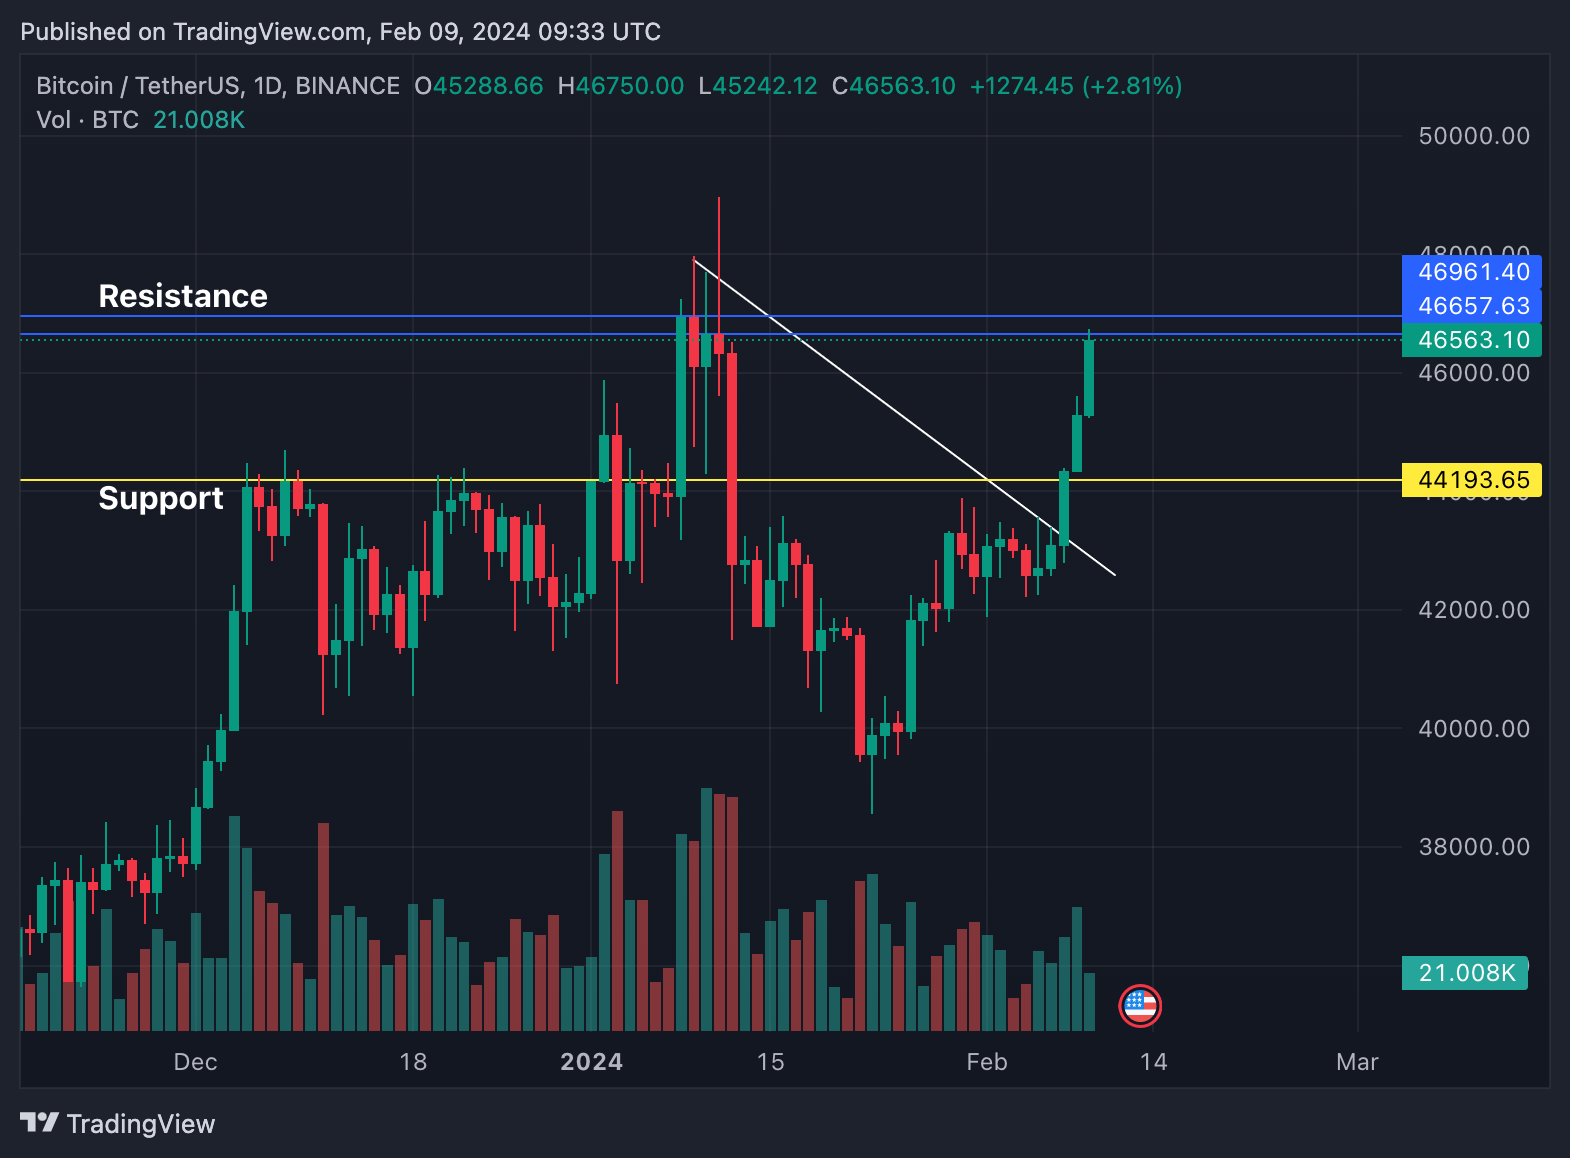 Bitcoin (BTC) heading for huge rejection area - traders beware